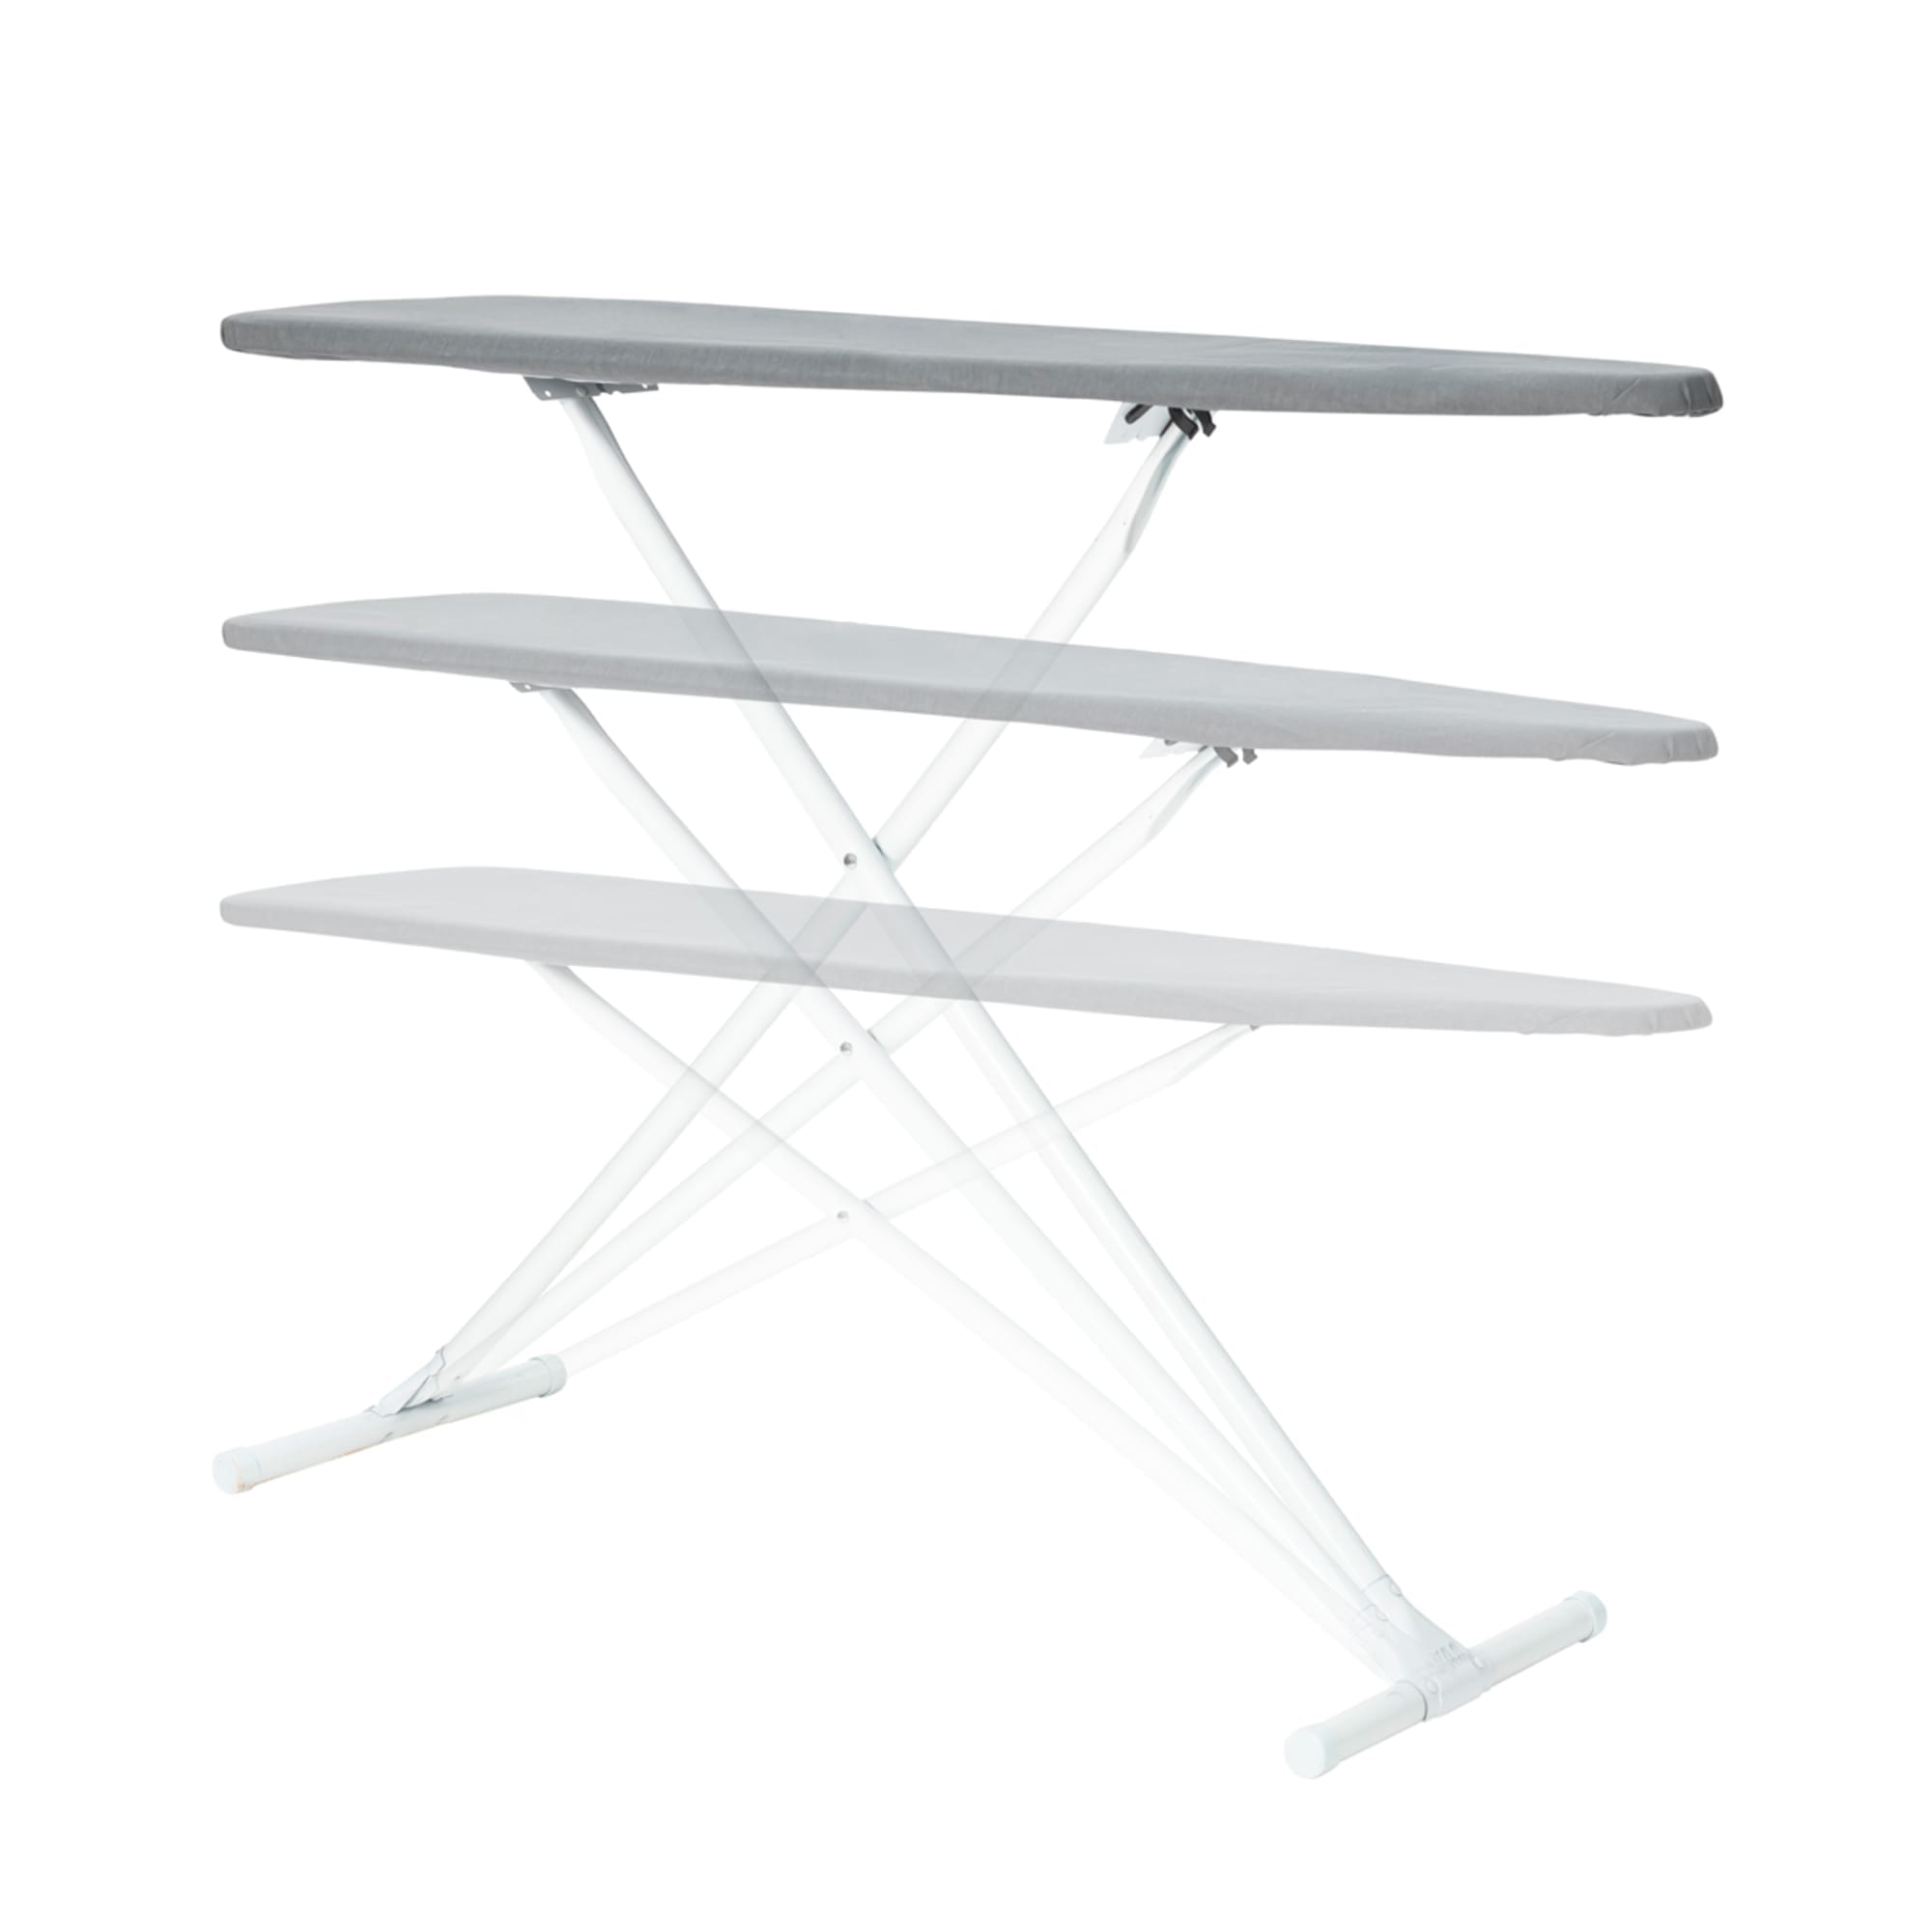 Seymour Home Products Adjustable Height, T-Leg Ironing Board With Perforated Top, Grey Solid (4 Pack) $25 EACH, CASE PACK OF 4